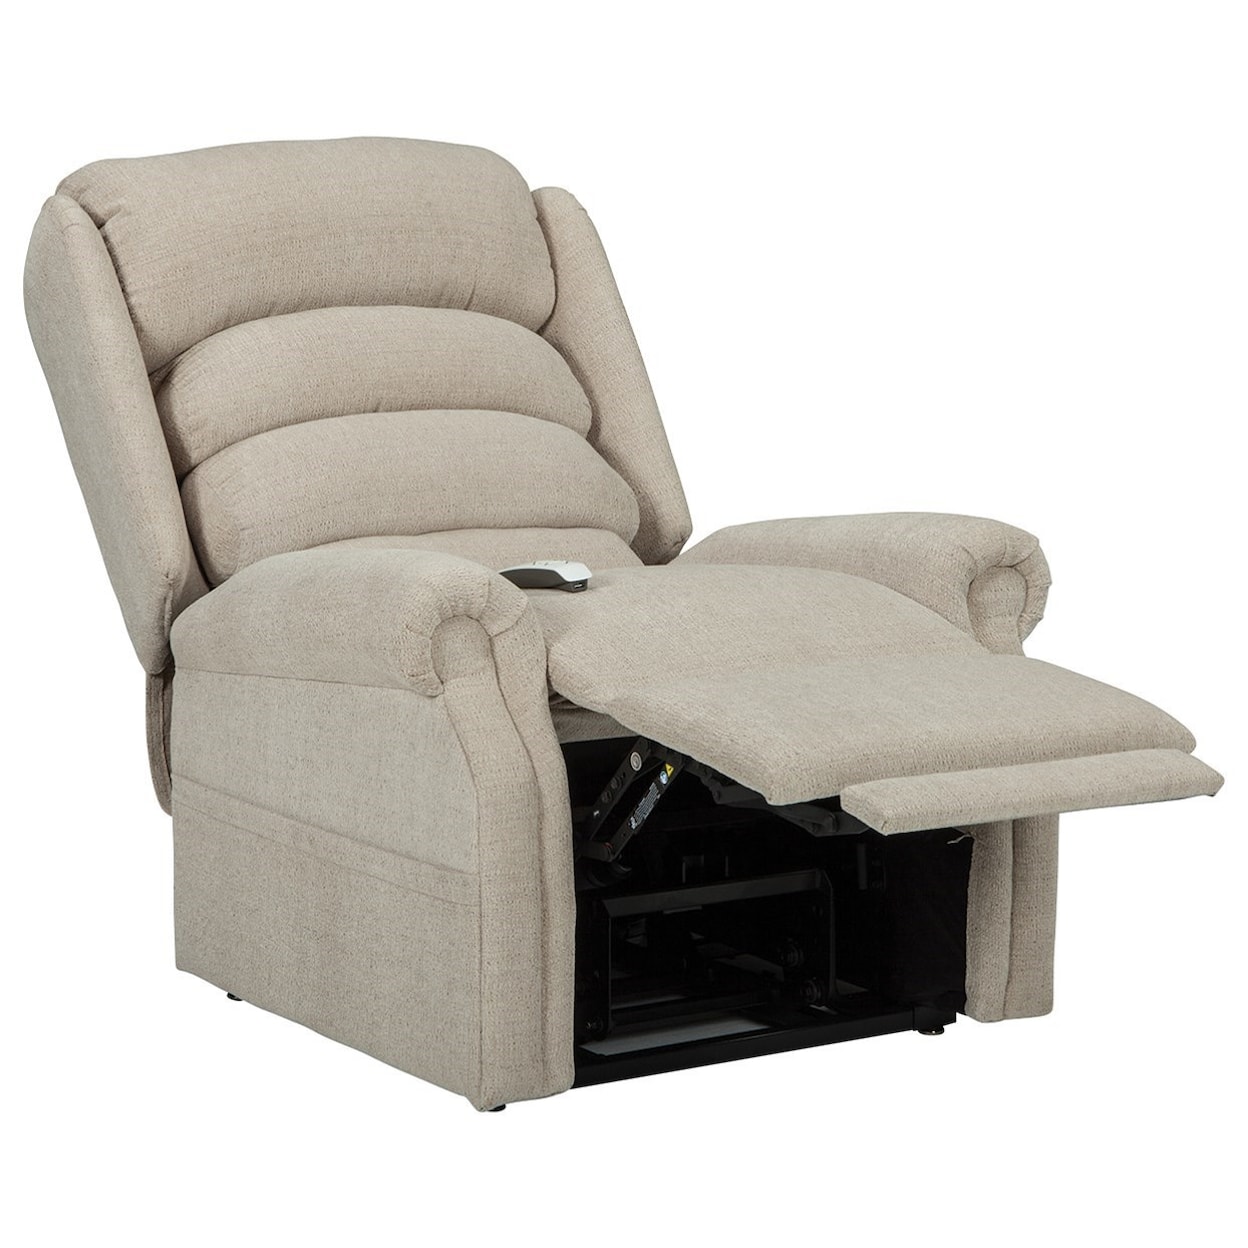 Windermere Motion Lift Chairs 3-Position Chaise Lounger